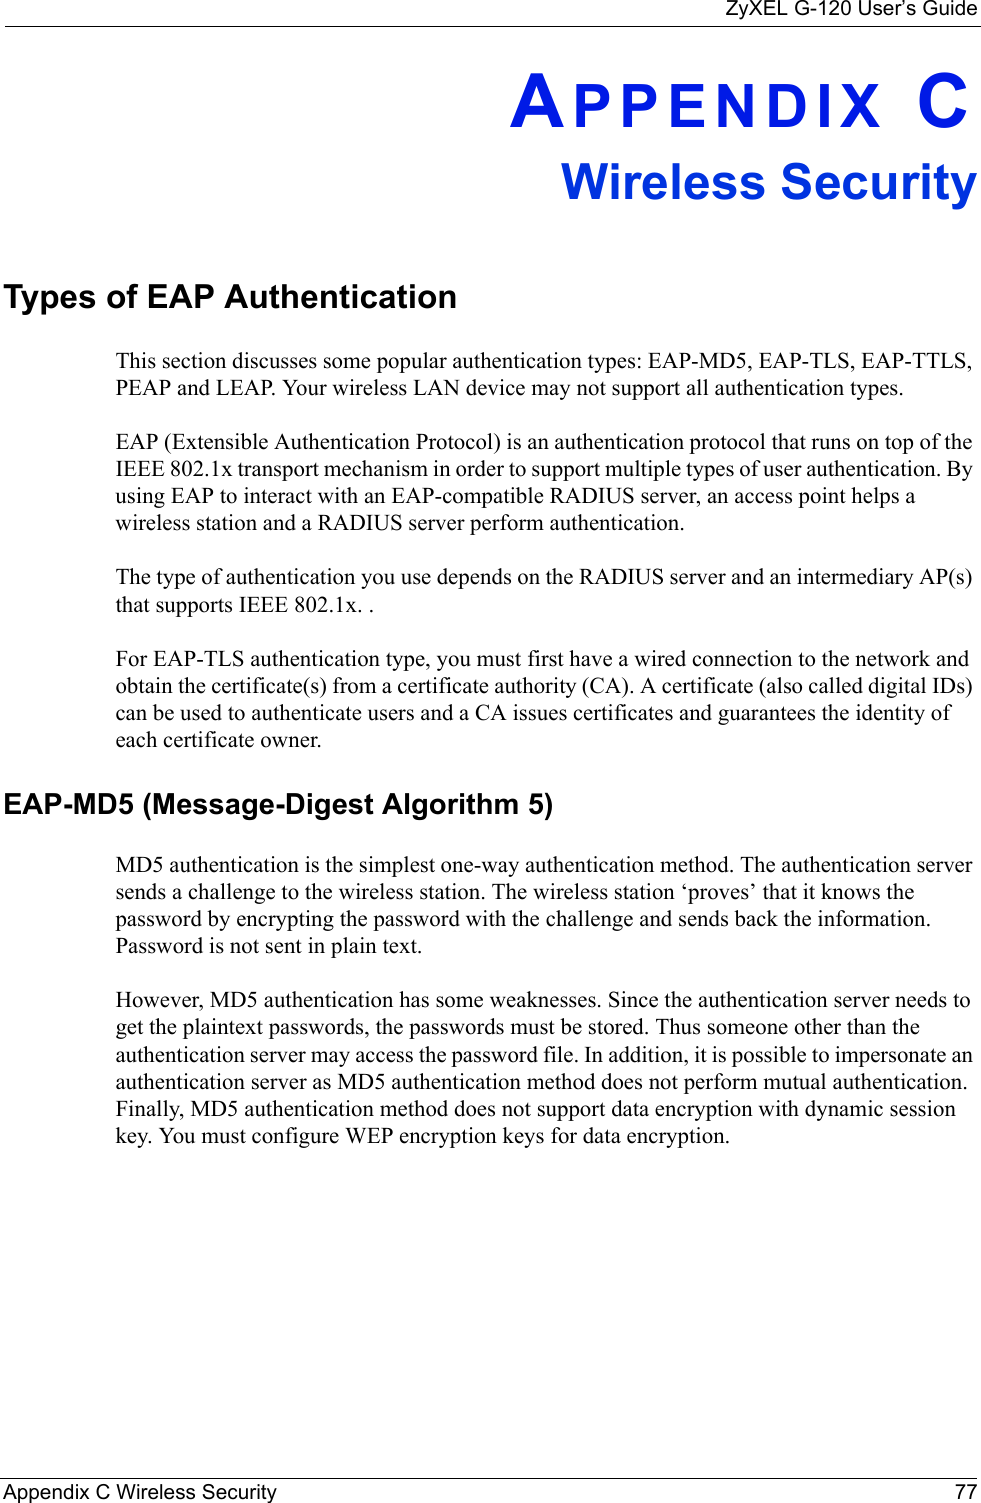 ZyXEL G-120 User’s GuideAppendix C Wireless Security 77APPENDIX CWireless SecurityTypes of EAP AuthenticationThis section discusses some popular authentication types: EAP-MD5, EAP-TLS, EAP-TTLS, PEAP and LEAP. Your wireless LAN device may not support all authentication types. EAP (Extensible Authentication Protocol) is an authentication protocol that runs on top of the IEEE 802.1x transport mechanism in order to support multiple types of user authentication. By using EAP to interact with an EAP-compatible RADIUS server, an access point helps a wireless station and a RADIUS server perform authentication. The type of authentication you use depends on the RADIUS server and an intermediary AP(s) that supports IEEE 802.1x. .For EAP-TLS authentication type, you must first have a wired connection to the network and obtain the certificate(s) from a certificate authority (CA). A certificate (also called digital IDs) can be used to authenticate users and a CA issues certificates and guarantees the identity of each certificate owner.EAP-MD5 (Message-Digest Algorithm 5)MD5 authentication is the simplest one-way authentication method. The authentication server sends a challenge to the wireless station. The wireless station ‘proves’ that it knows the password by encrypting the password with the challenge and sends back the information. Password is not sent in plain text. However, MD5 authentication has some weaknesses. Since the authentication server needs to get the plaintext passwords, the passwords must be stored. Thus someone other than the authentication server may access the password file. In addition, it is possible to impersonate an authentication server as MD5 authentication method does not perform mutual authentication. Finally, MD5 authentication method does not support data encryption with dynamic session key. You must configure WEP encryption keys for data encryption. 